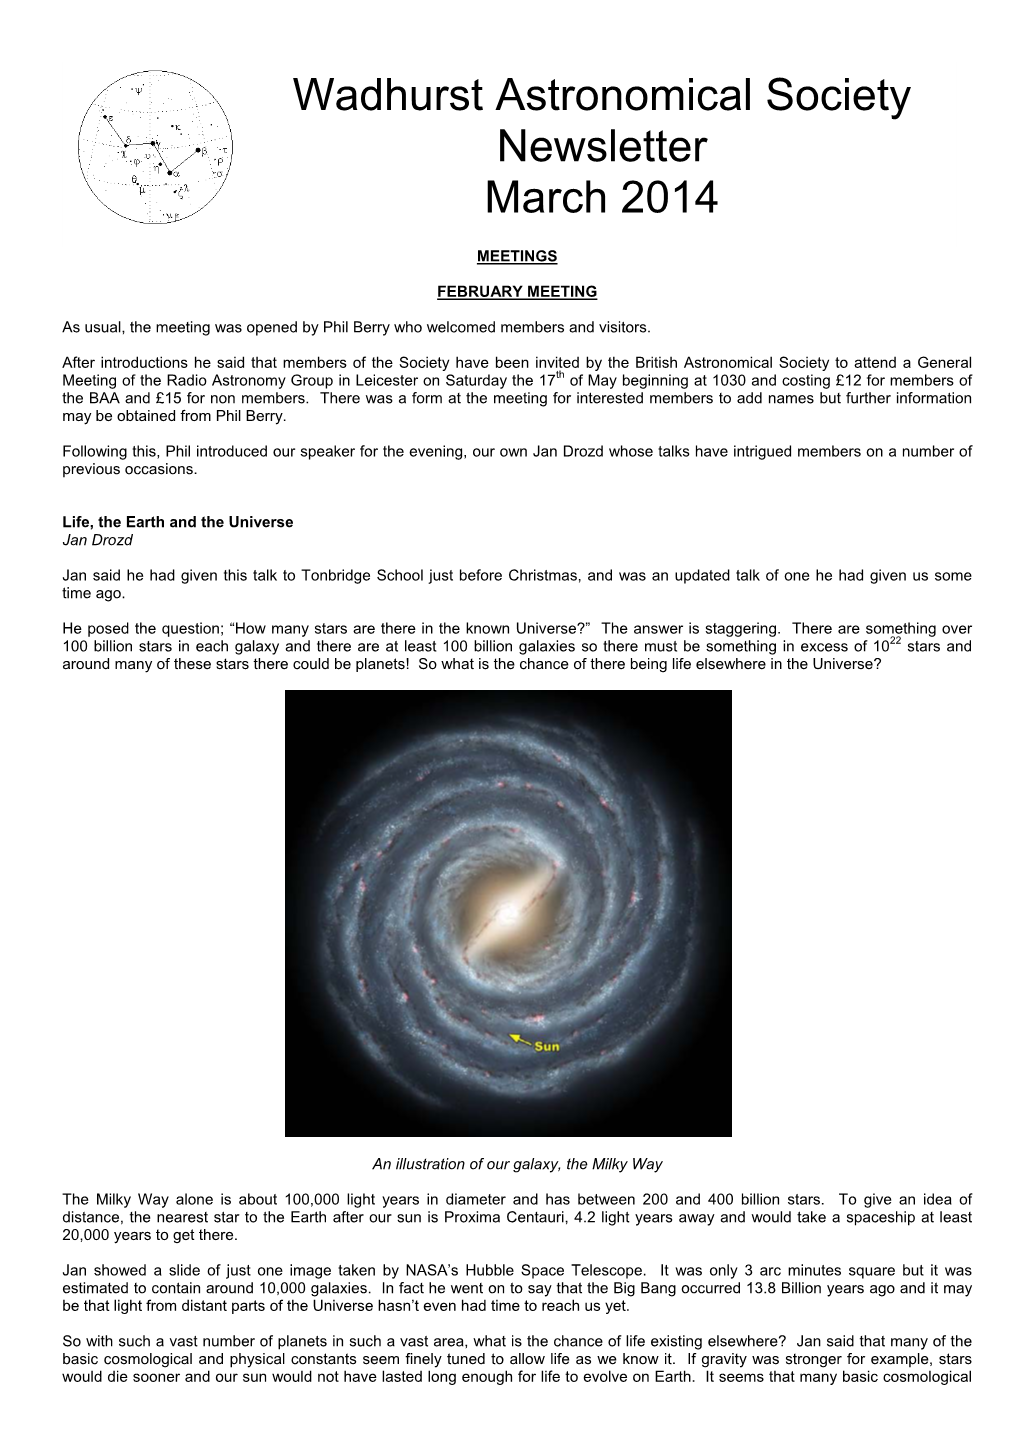 Wadhurst Astronomical Society Newsletter March 2014